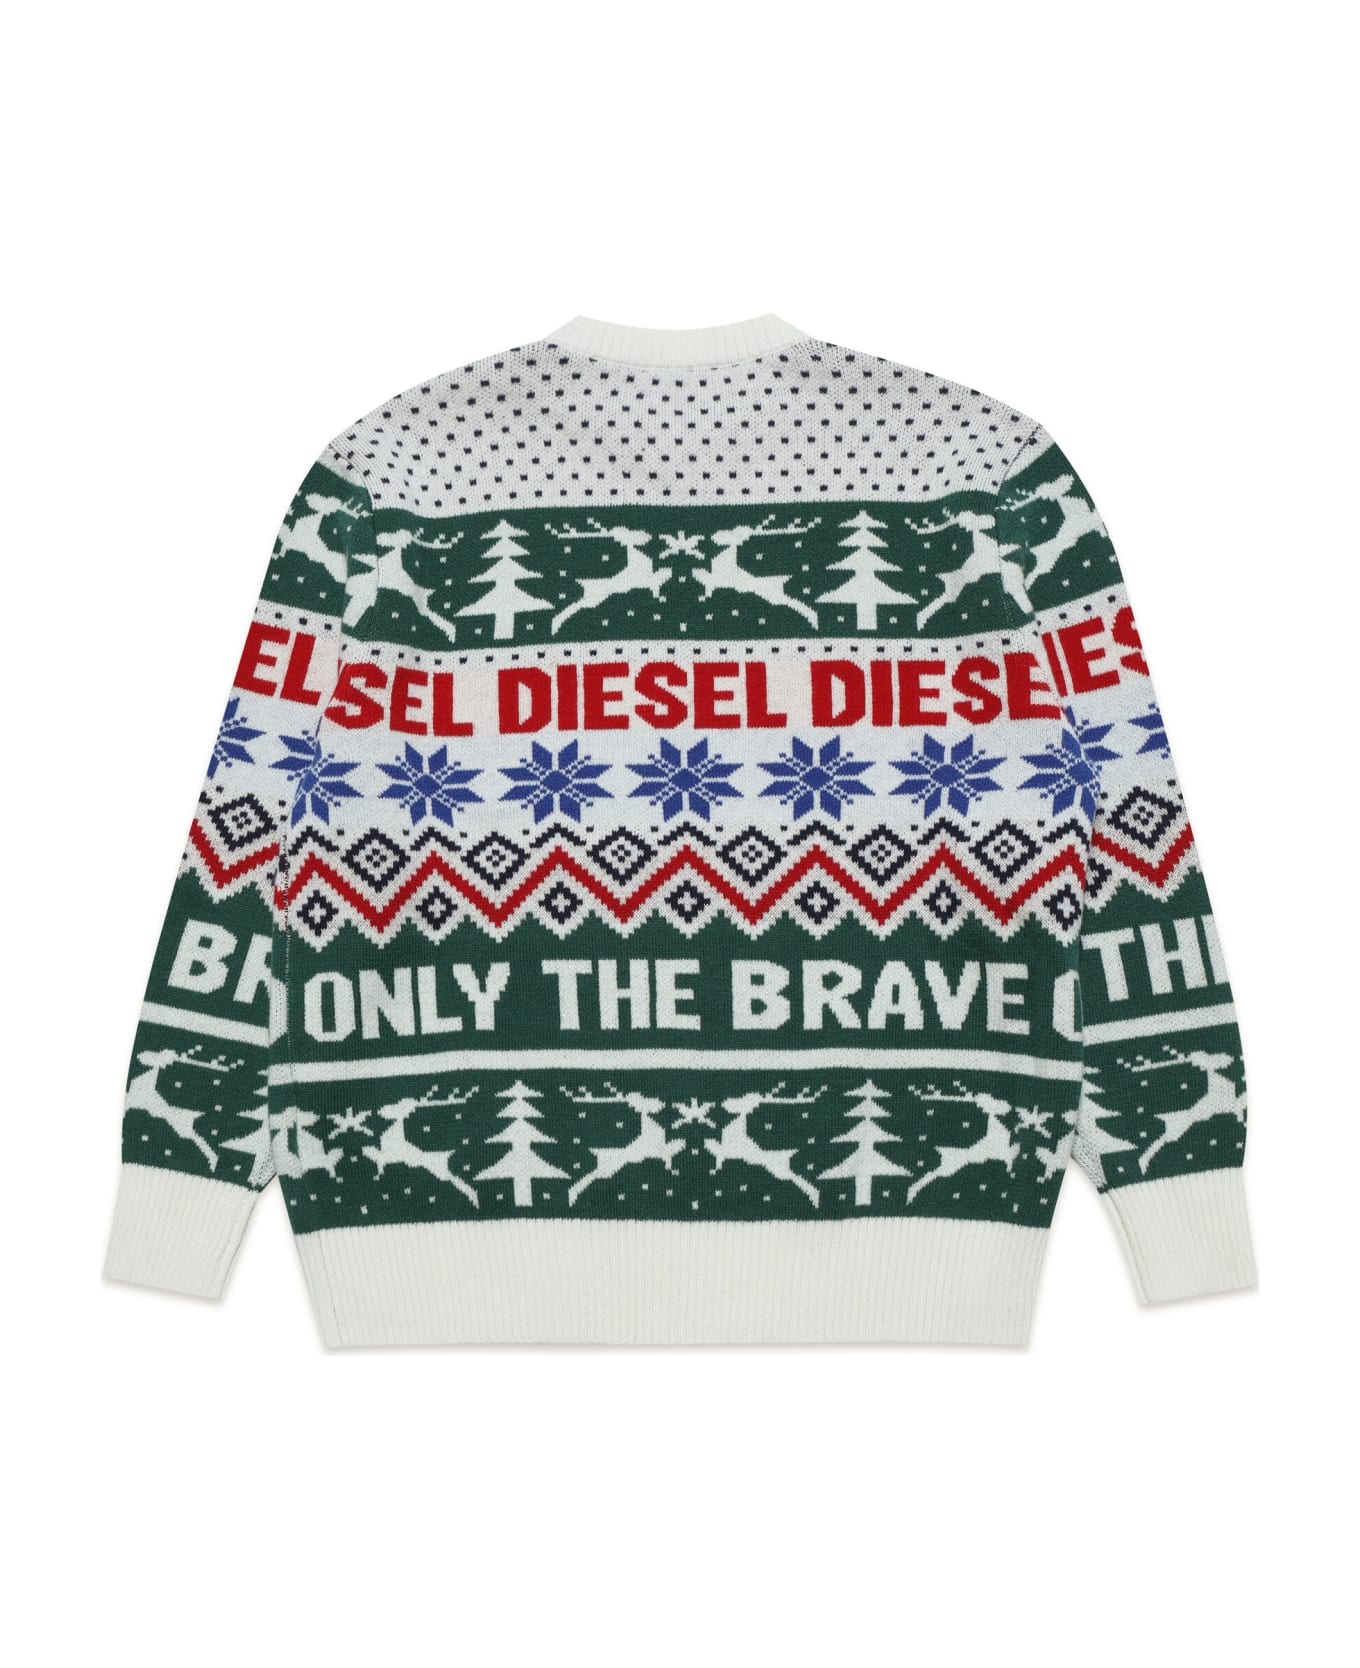 Diesel Kerry Chr Over Knitwear Wool-blend Sweater With Christmas Pattern - Multicolor ニットウェア＆スウェットシャツ